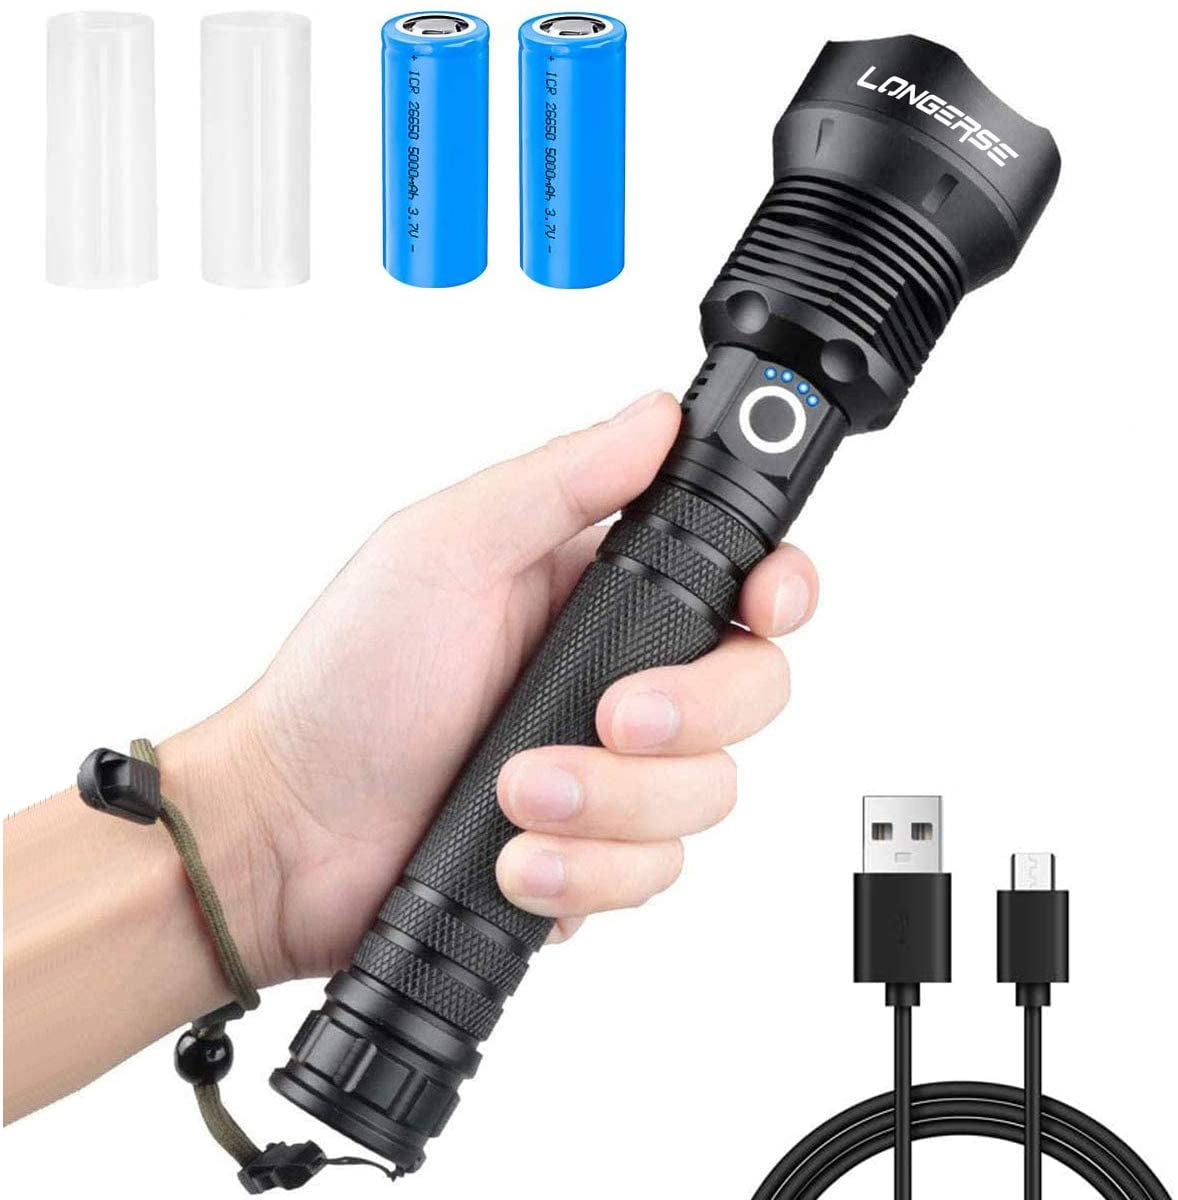 2PCS High Power Tactical 350000LM Zoomable Tactical LED Flashlight Torch Lamp 